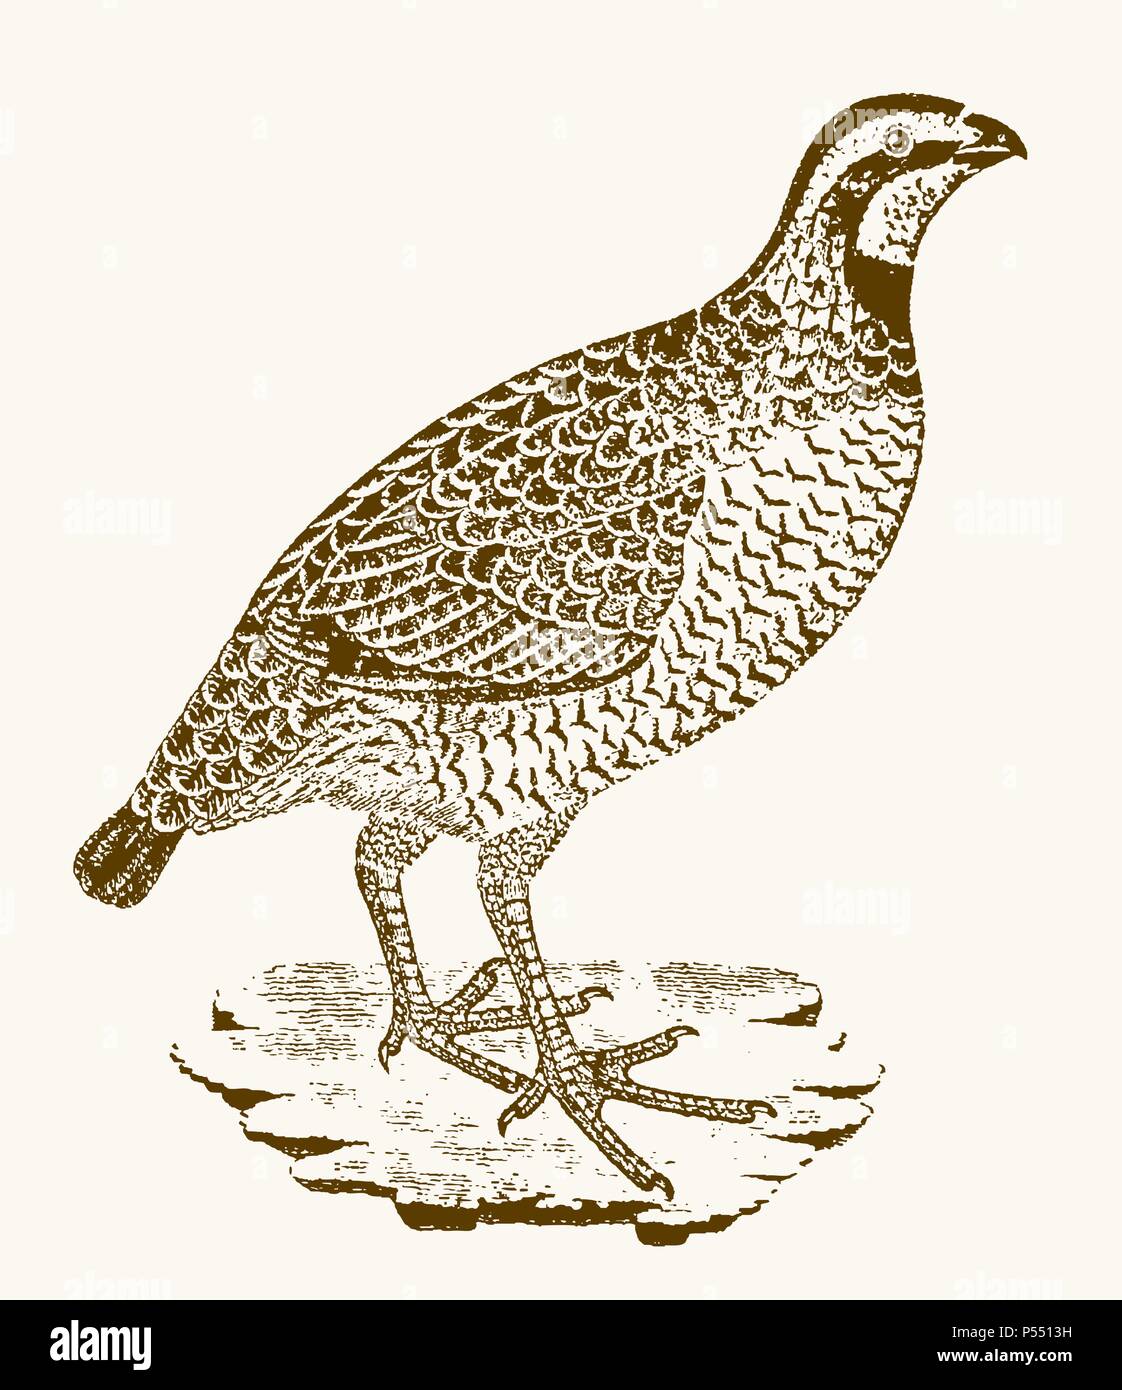 Rock partridge (alectoris graeca) sitting on a rocky ground. Illustration after a vintage engraving from the 19th century Stock Vector